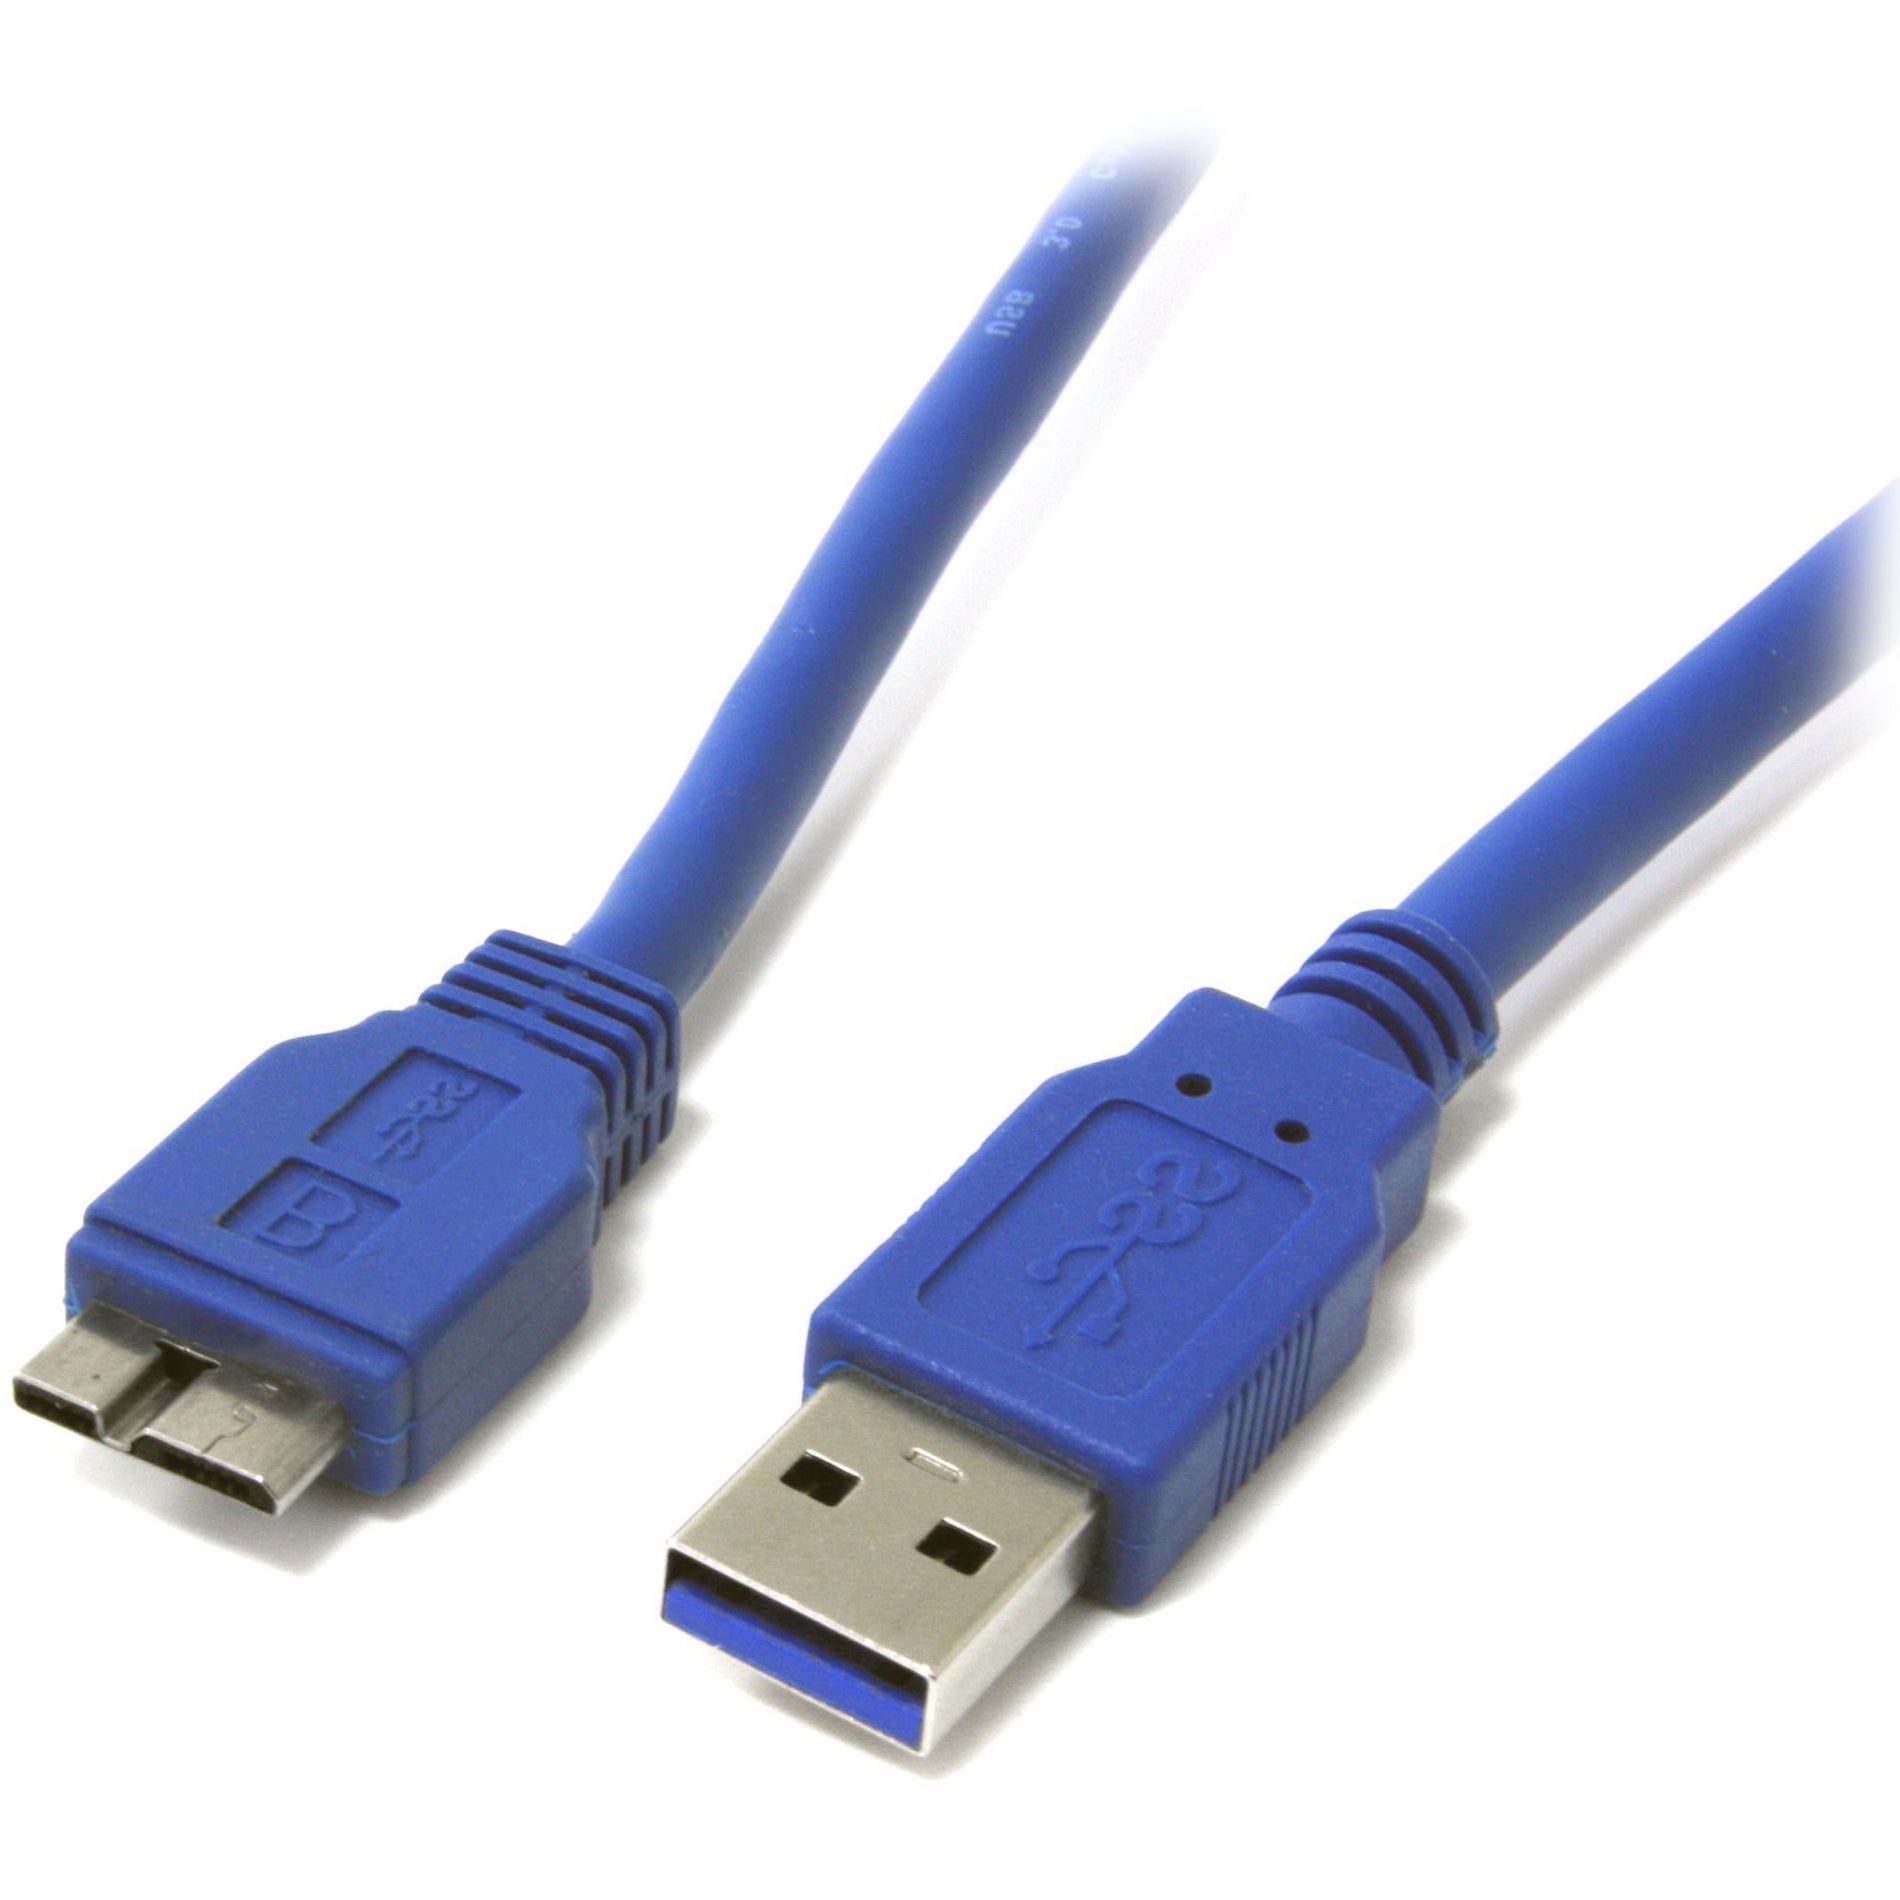 StarTech.com USB3SAUB3 3 ft SuperSpeed USB 3.0 Cable A to Micro B, High-Speed Data Transfer, EMI Protection, Strain Relief